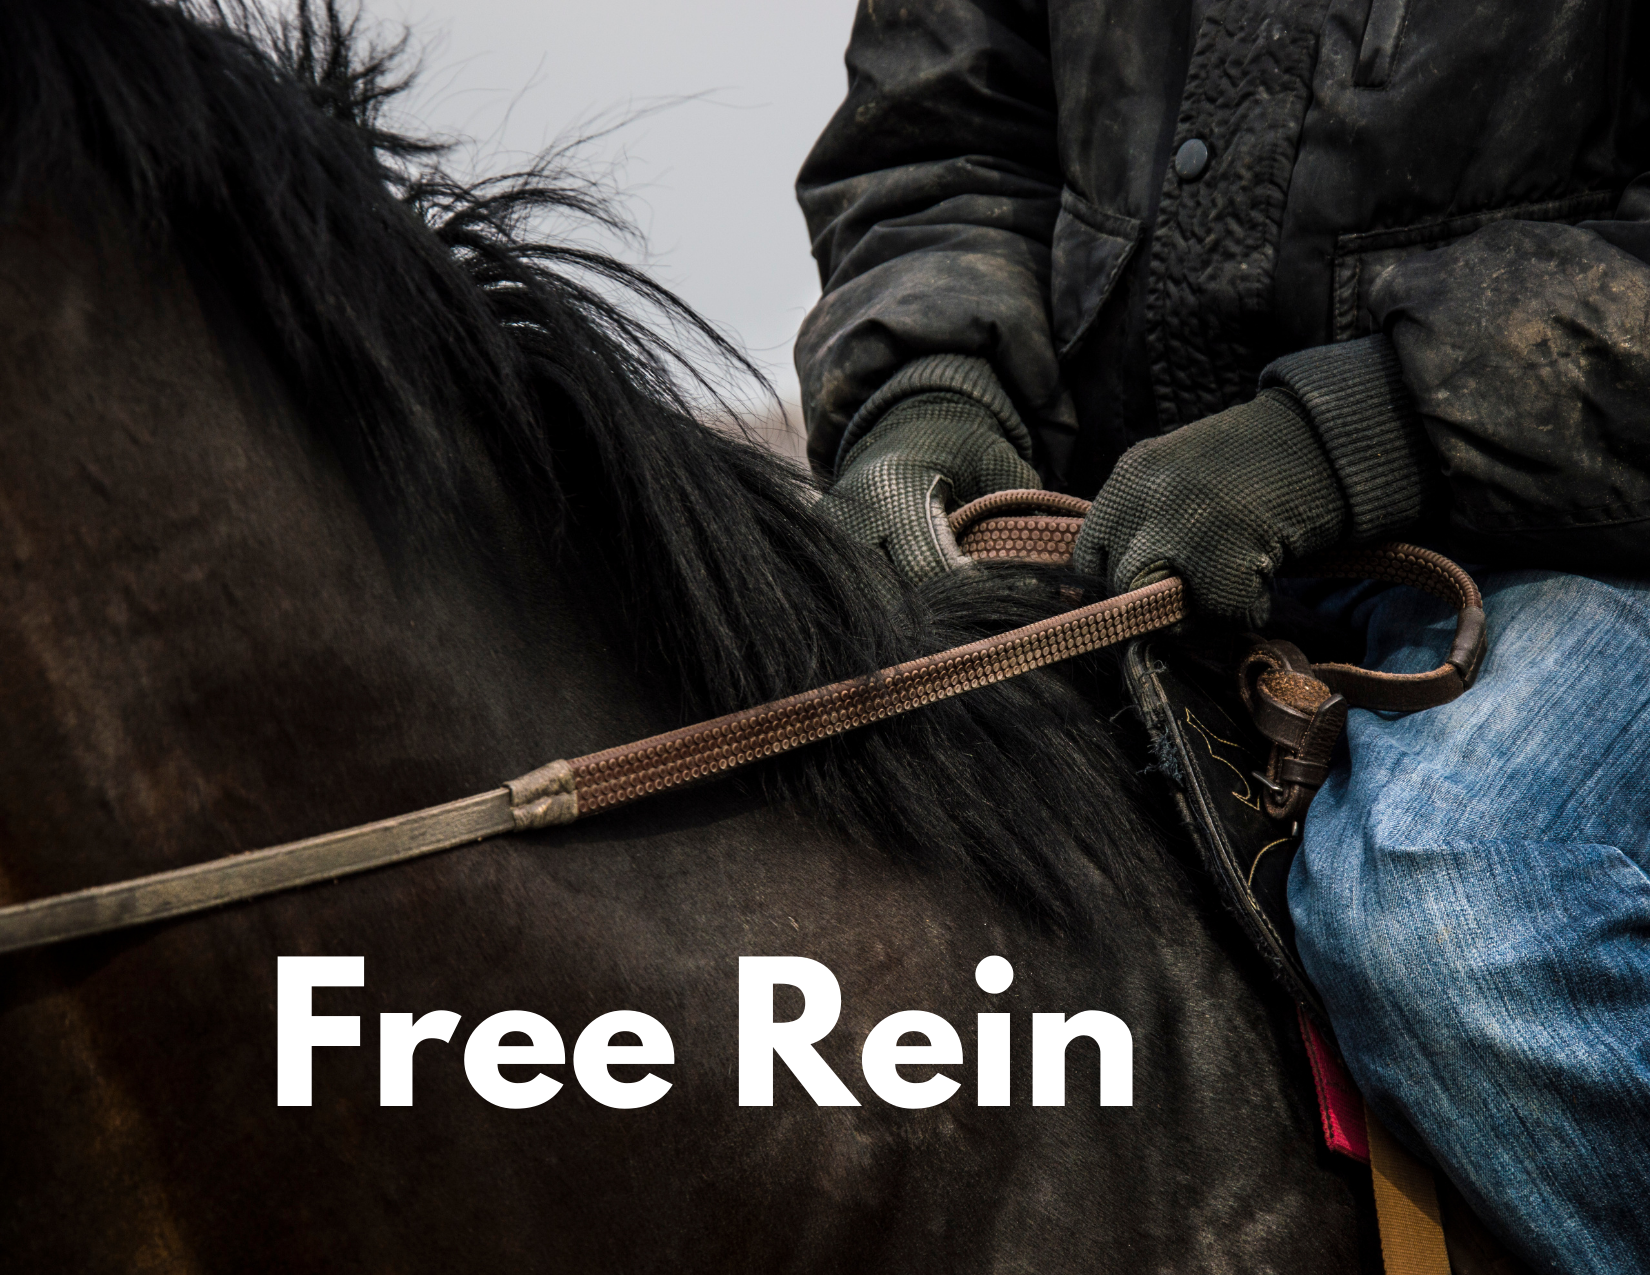 A picture of a horse and a man holding the reins with the caption "Free Rein"